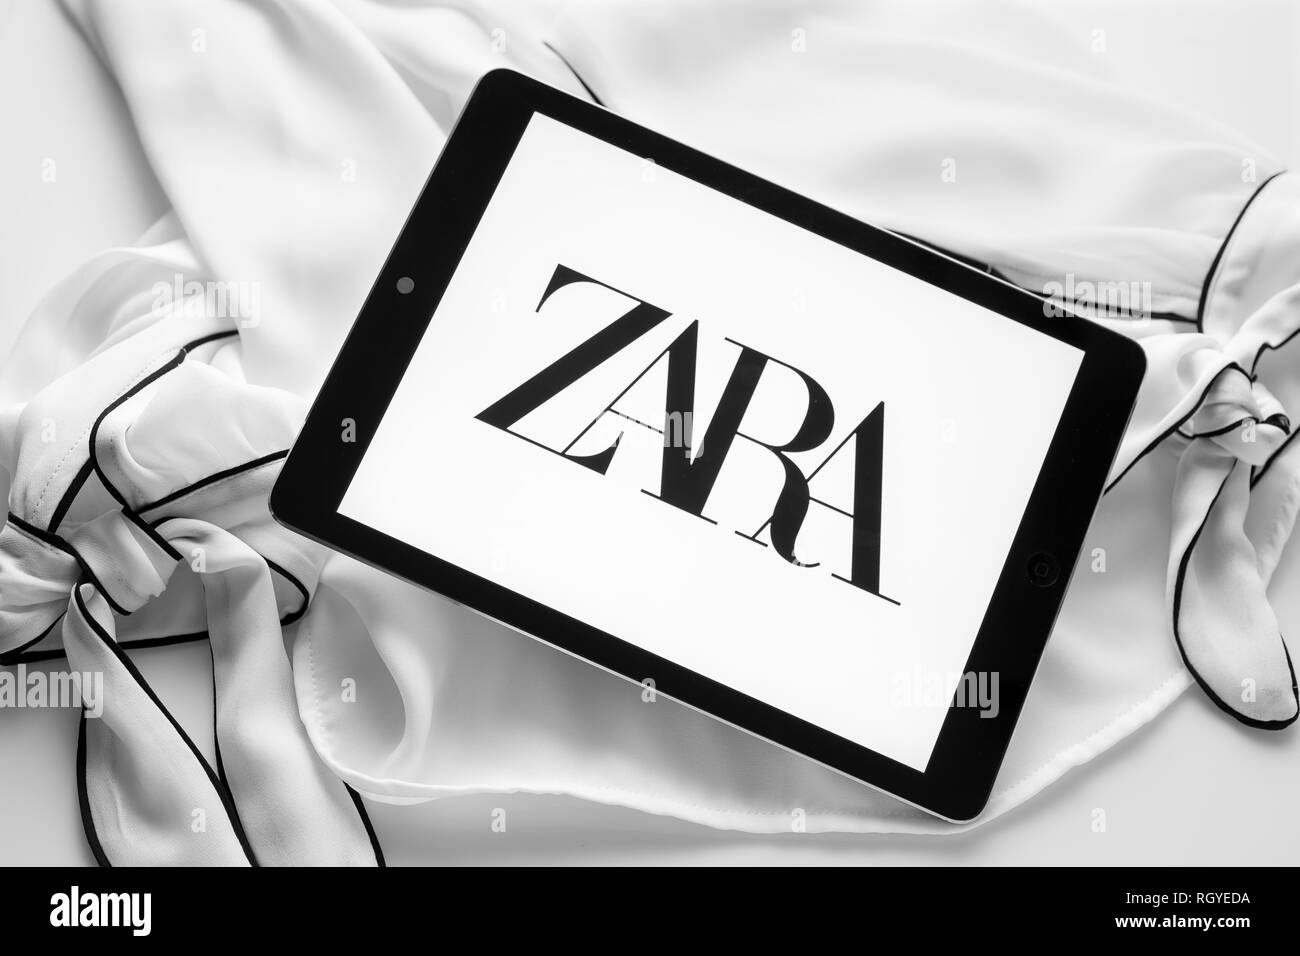 Galicia, Spain; january 30 2019: Zara new logo. Tablet with new curvy typeface logo on black and white blouse Stock Photo